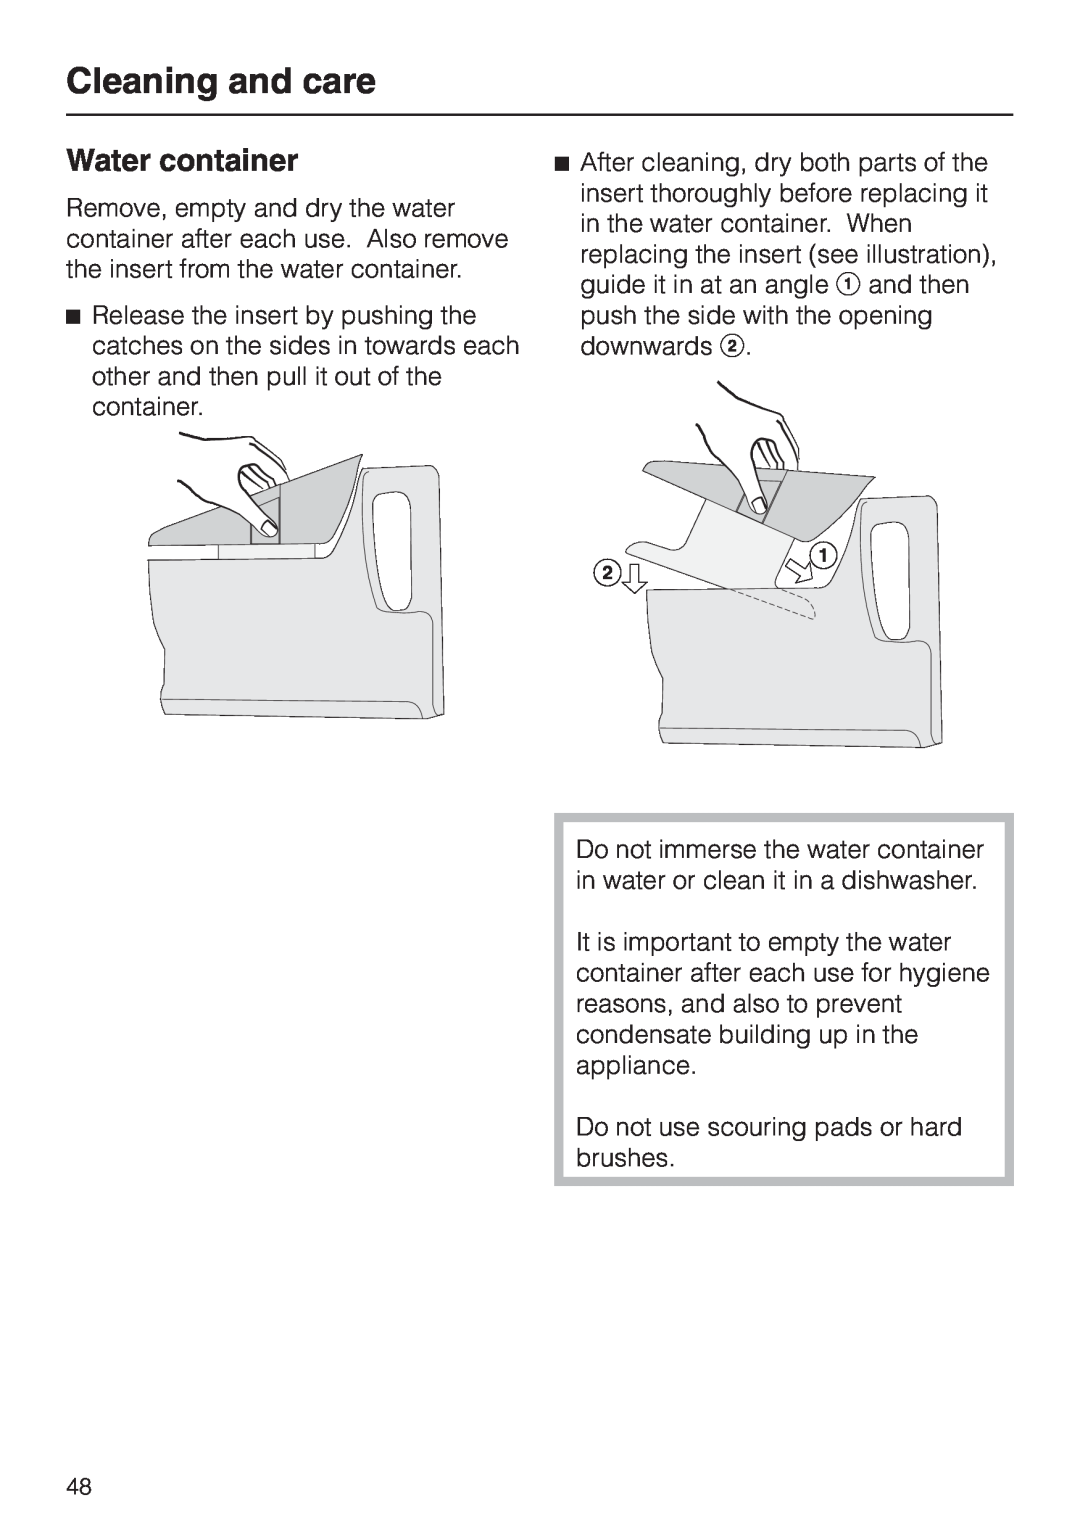 Miele DG 2561, DG2661, DG 2651, DG 2551, DG 2351 installation instructions Water container, Cleaning and care 